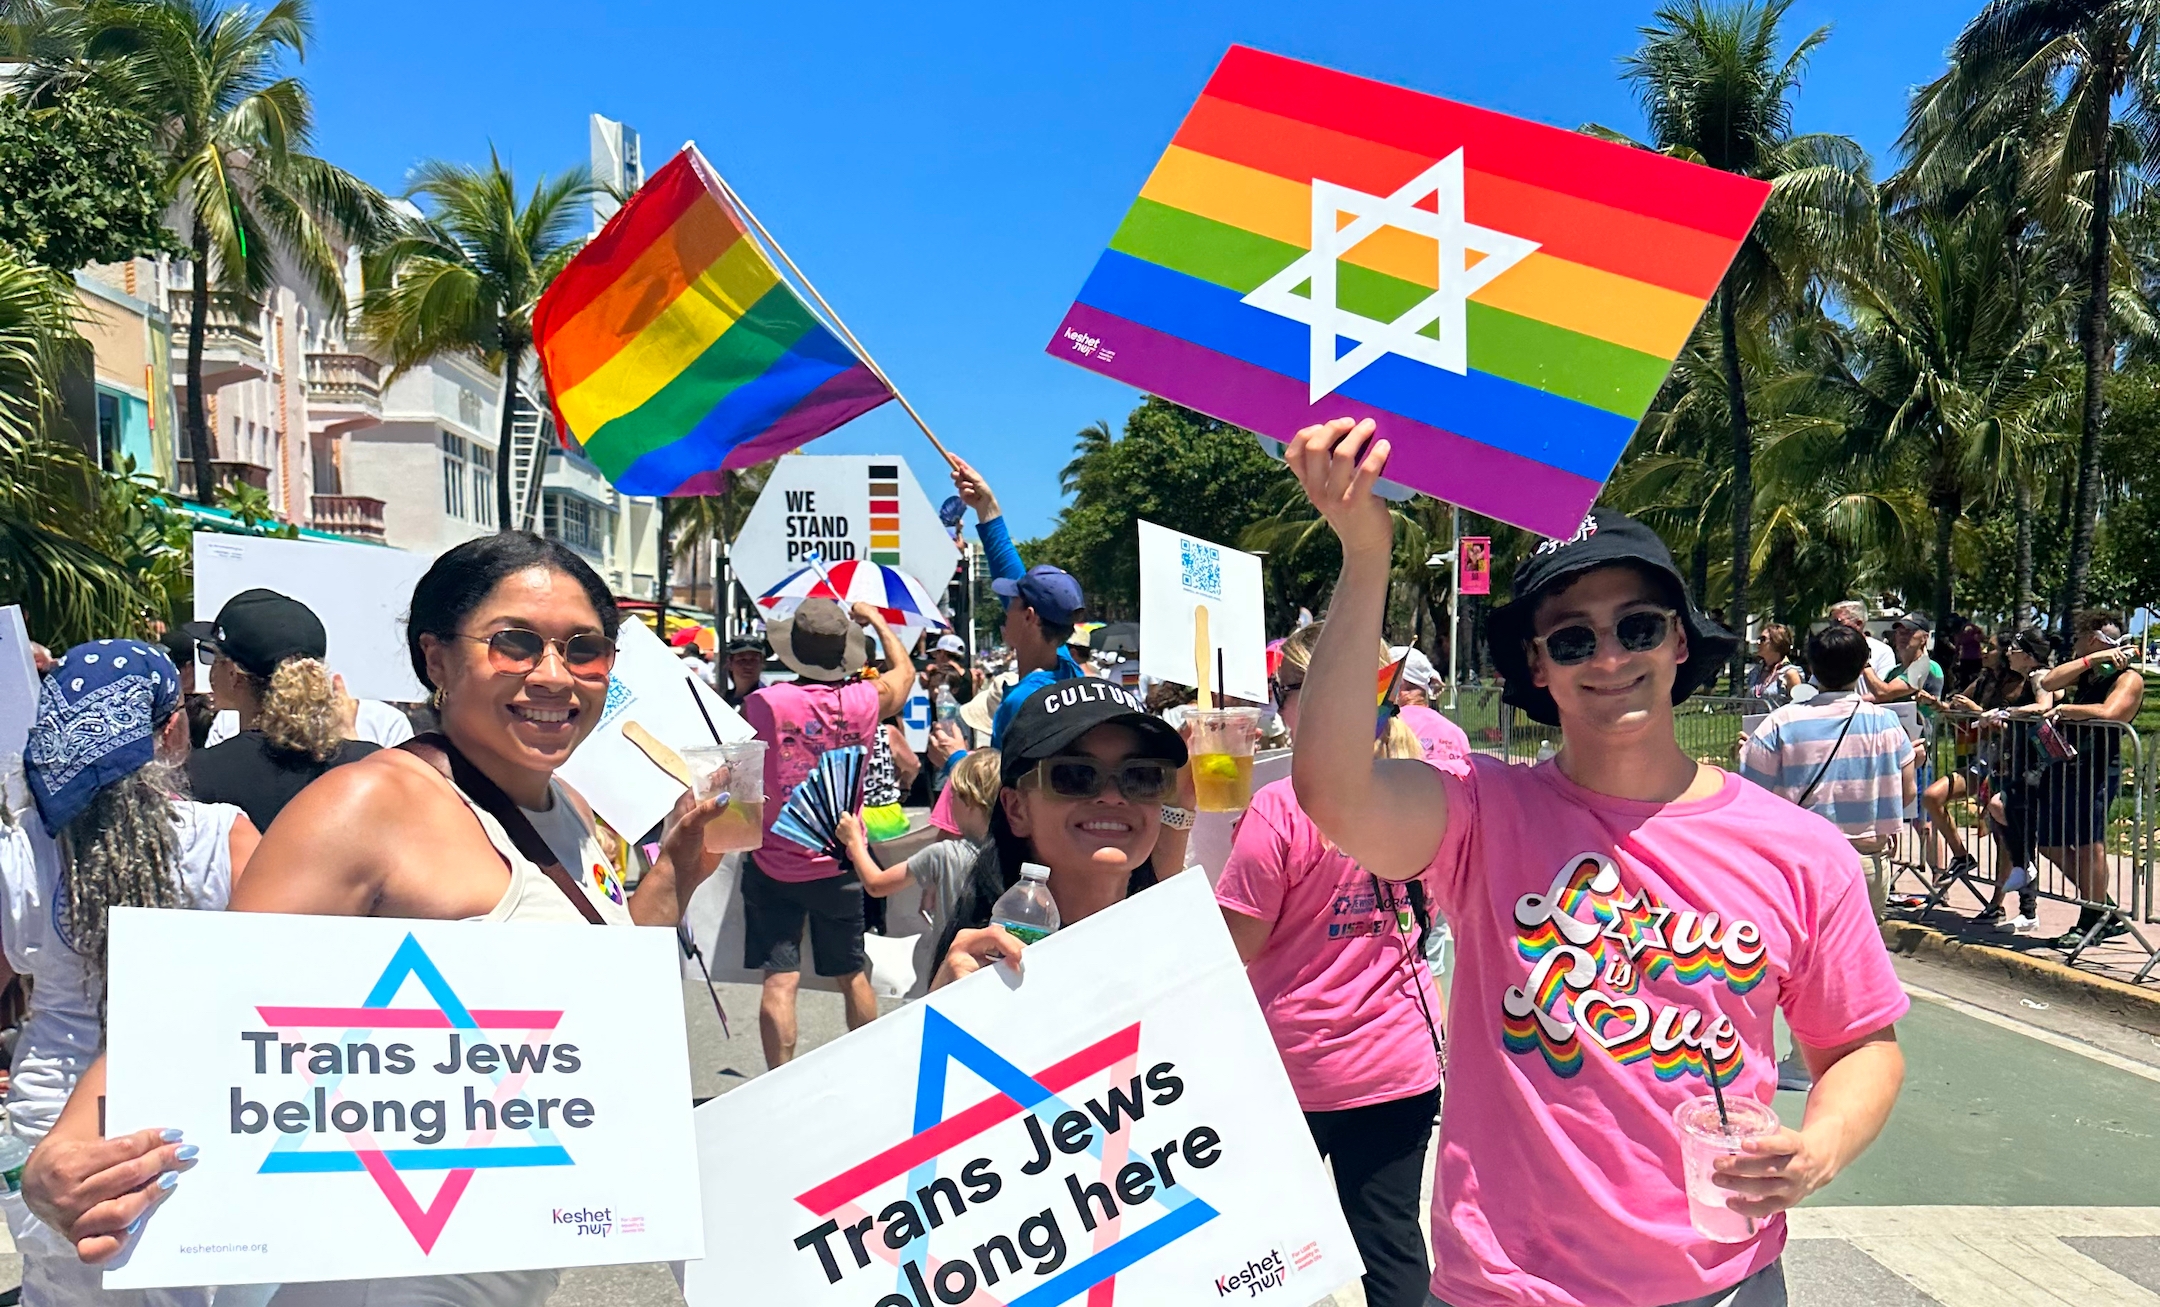 Jews marching with signs reading "Trans Jews Belong Here"